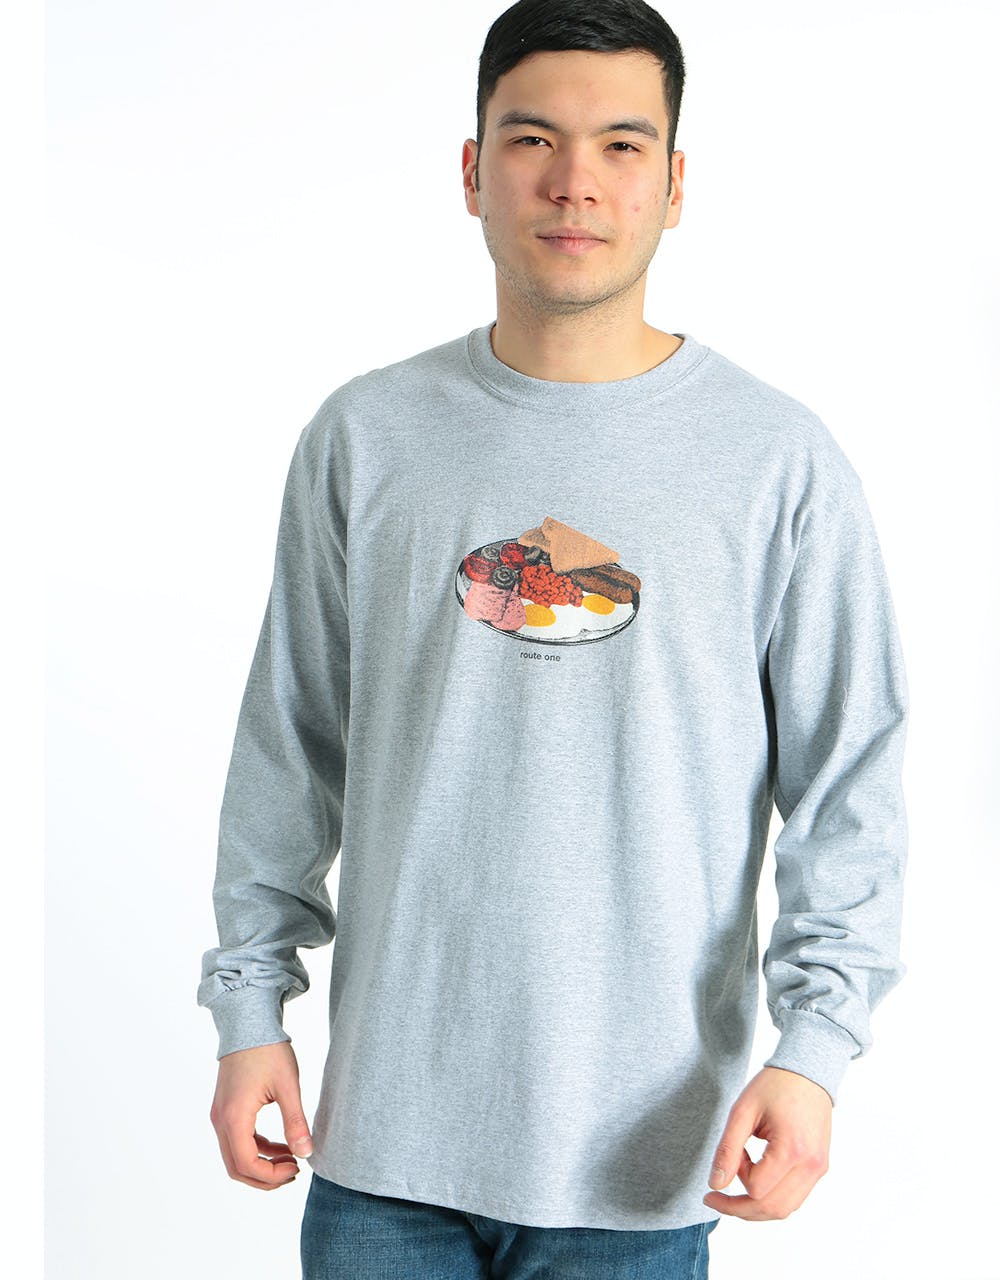 Route One Full English Long Sleeve T-Shirt - Heather Grey